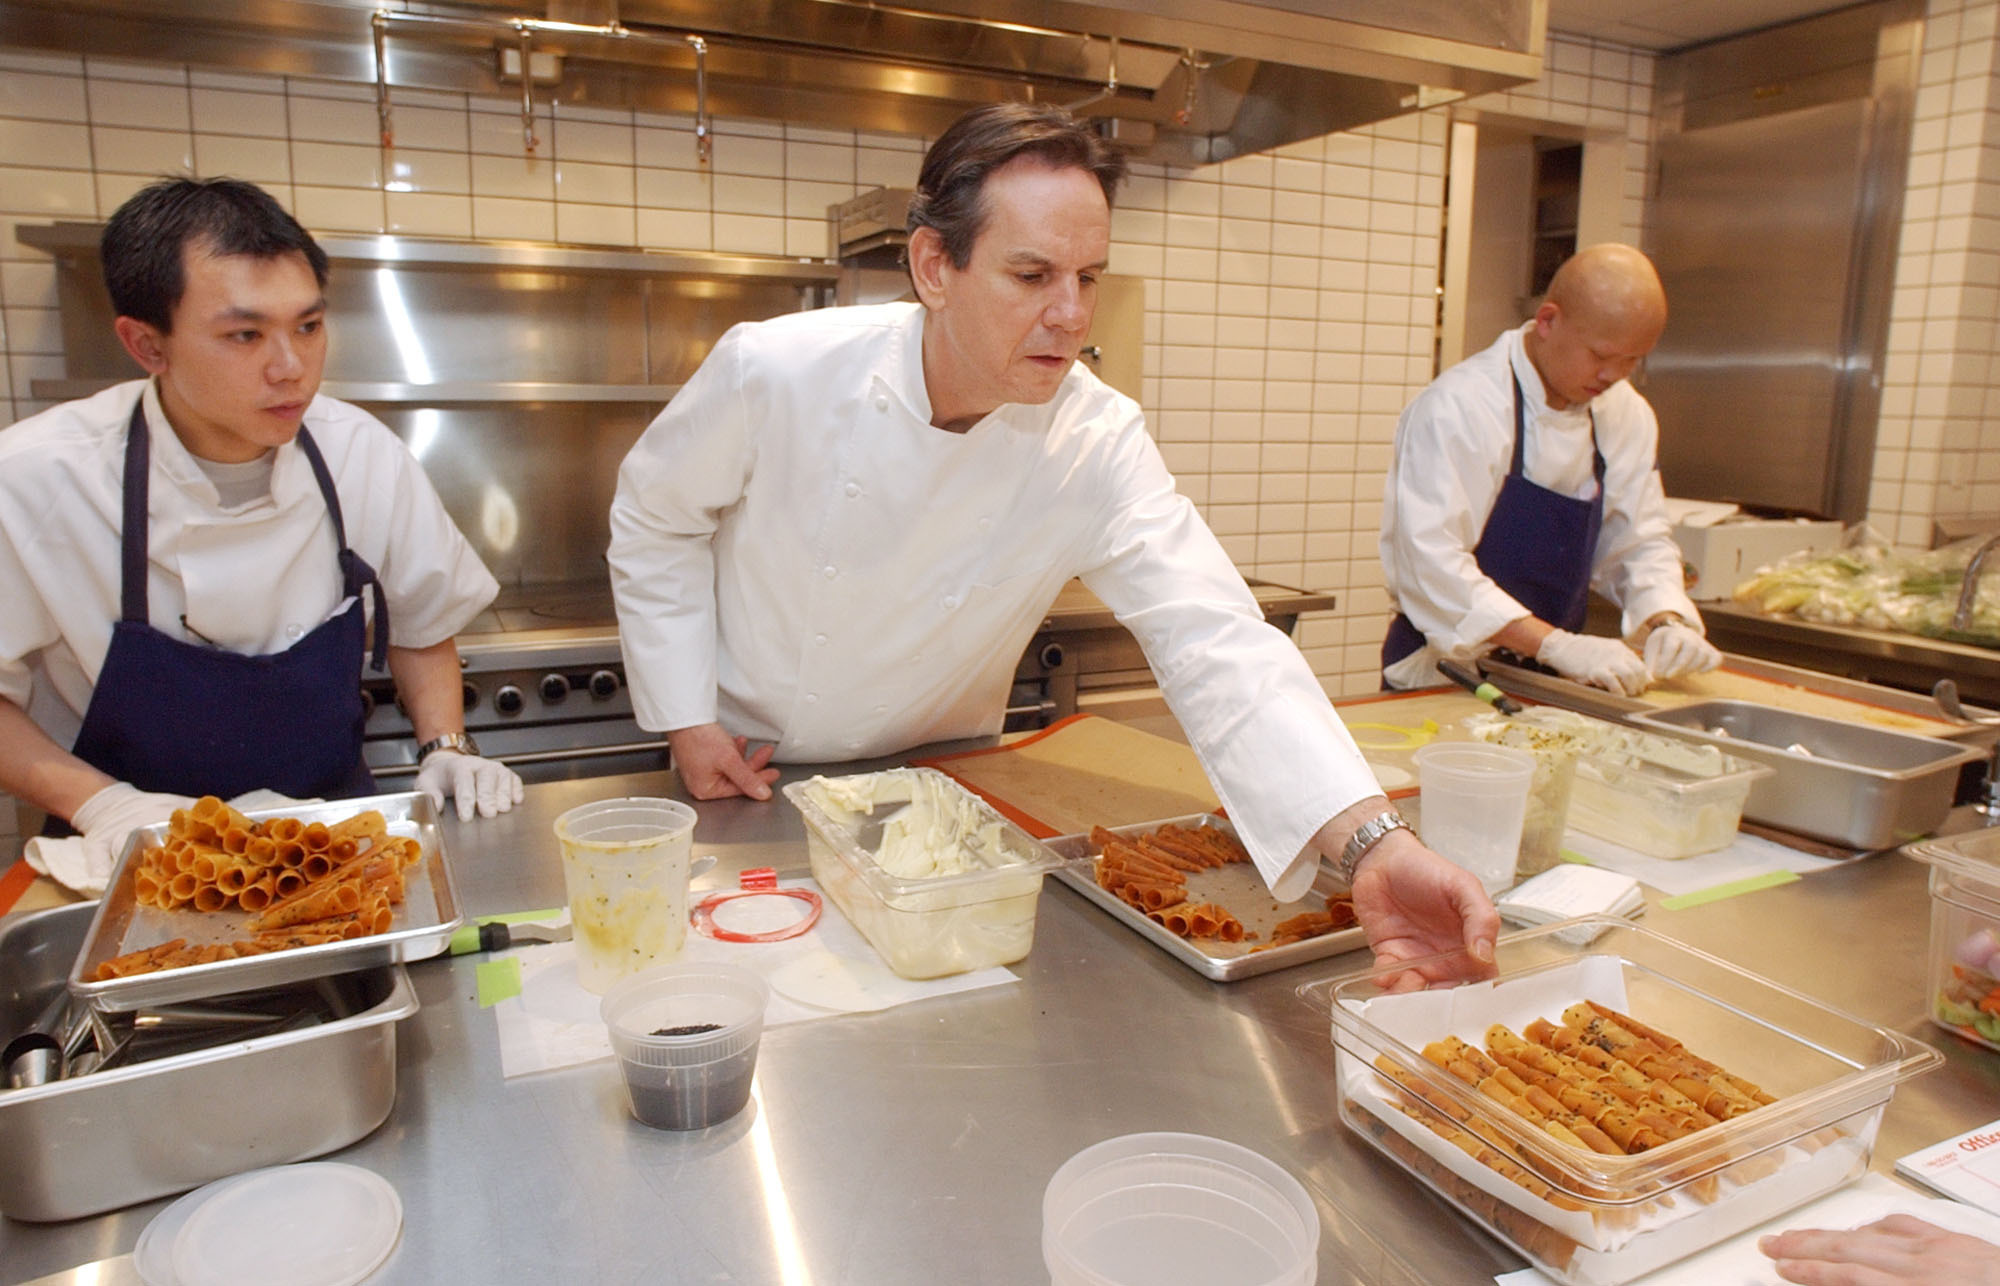 Chef Thomas Keller checks out preparations in the kitchen of his New York restaurant, Per Se, in the Time Warner Center, in February 2004. Photo: Richard Drew/AP